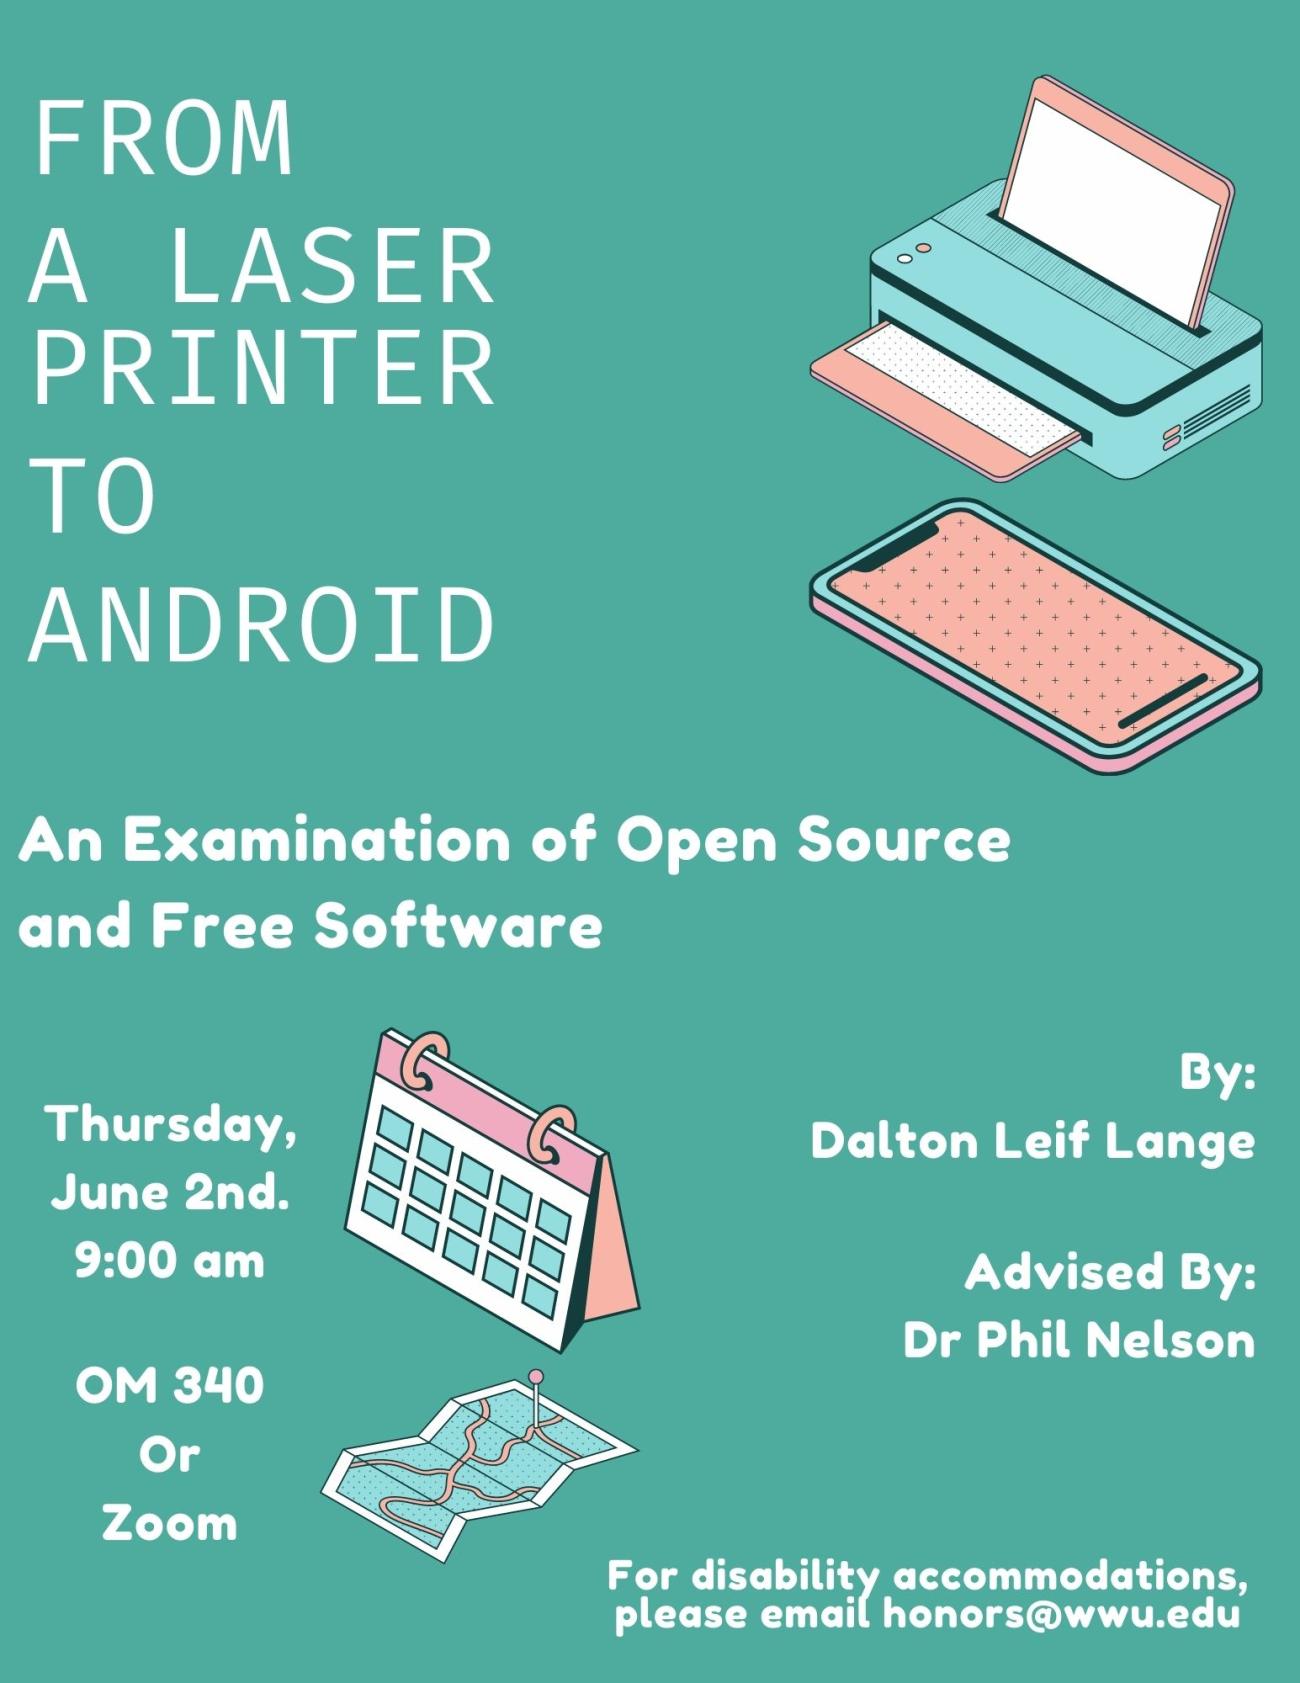 A poster with a teal background and graphics of a printer, a phone, a calendar, and a map. Text reads: "From A Laser Printer to Android: An Examination of Open Source and Free Software. Thursday, June 2nd. 9:00 am. OM340 or Zoom. By: Dalton Leif Lange. Advised by: Dr. Phil Nelson. For disability accommodations, please email honors@wwu.edu."